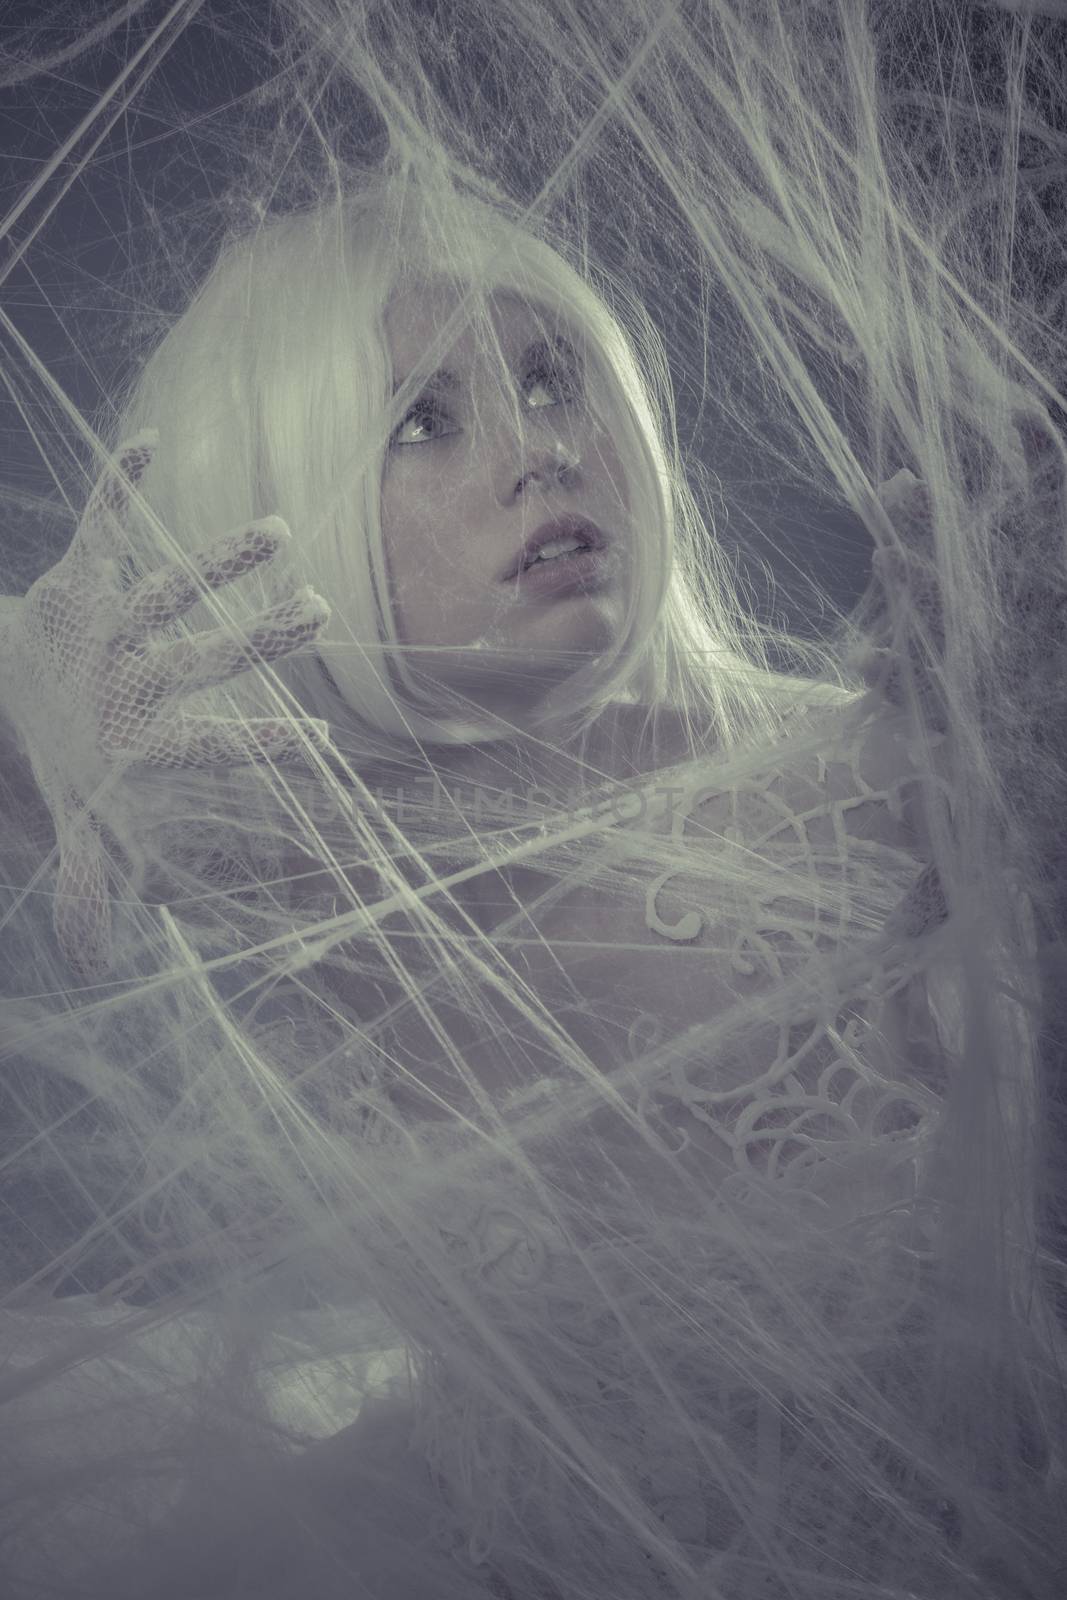 Spider web trapped, Sensual lady in white corset, long hair, han by FernandoCortes